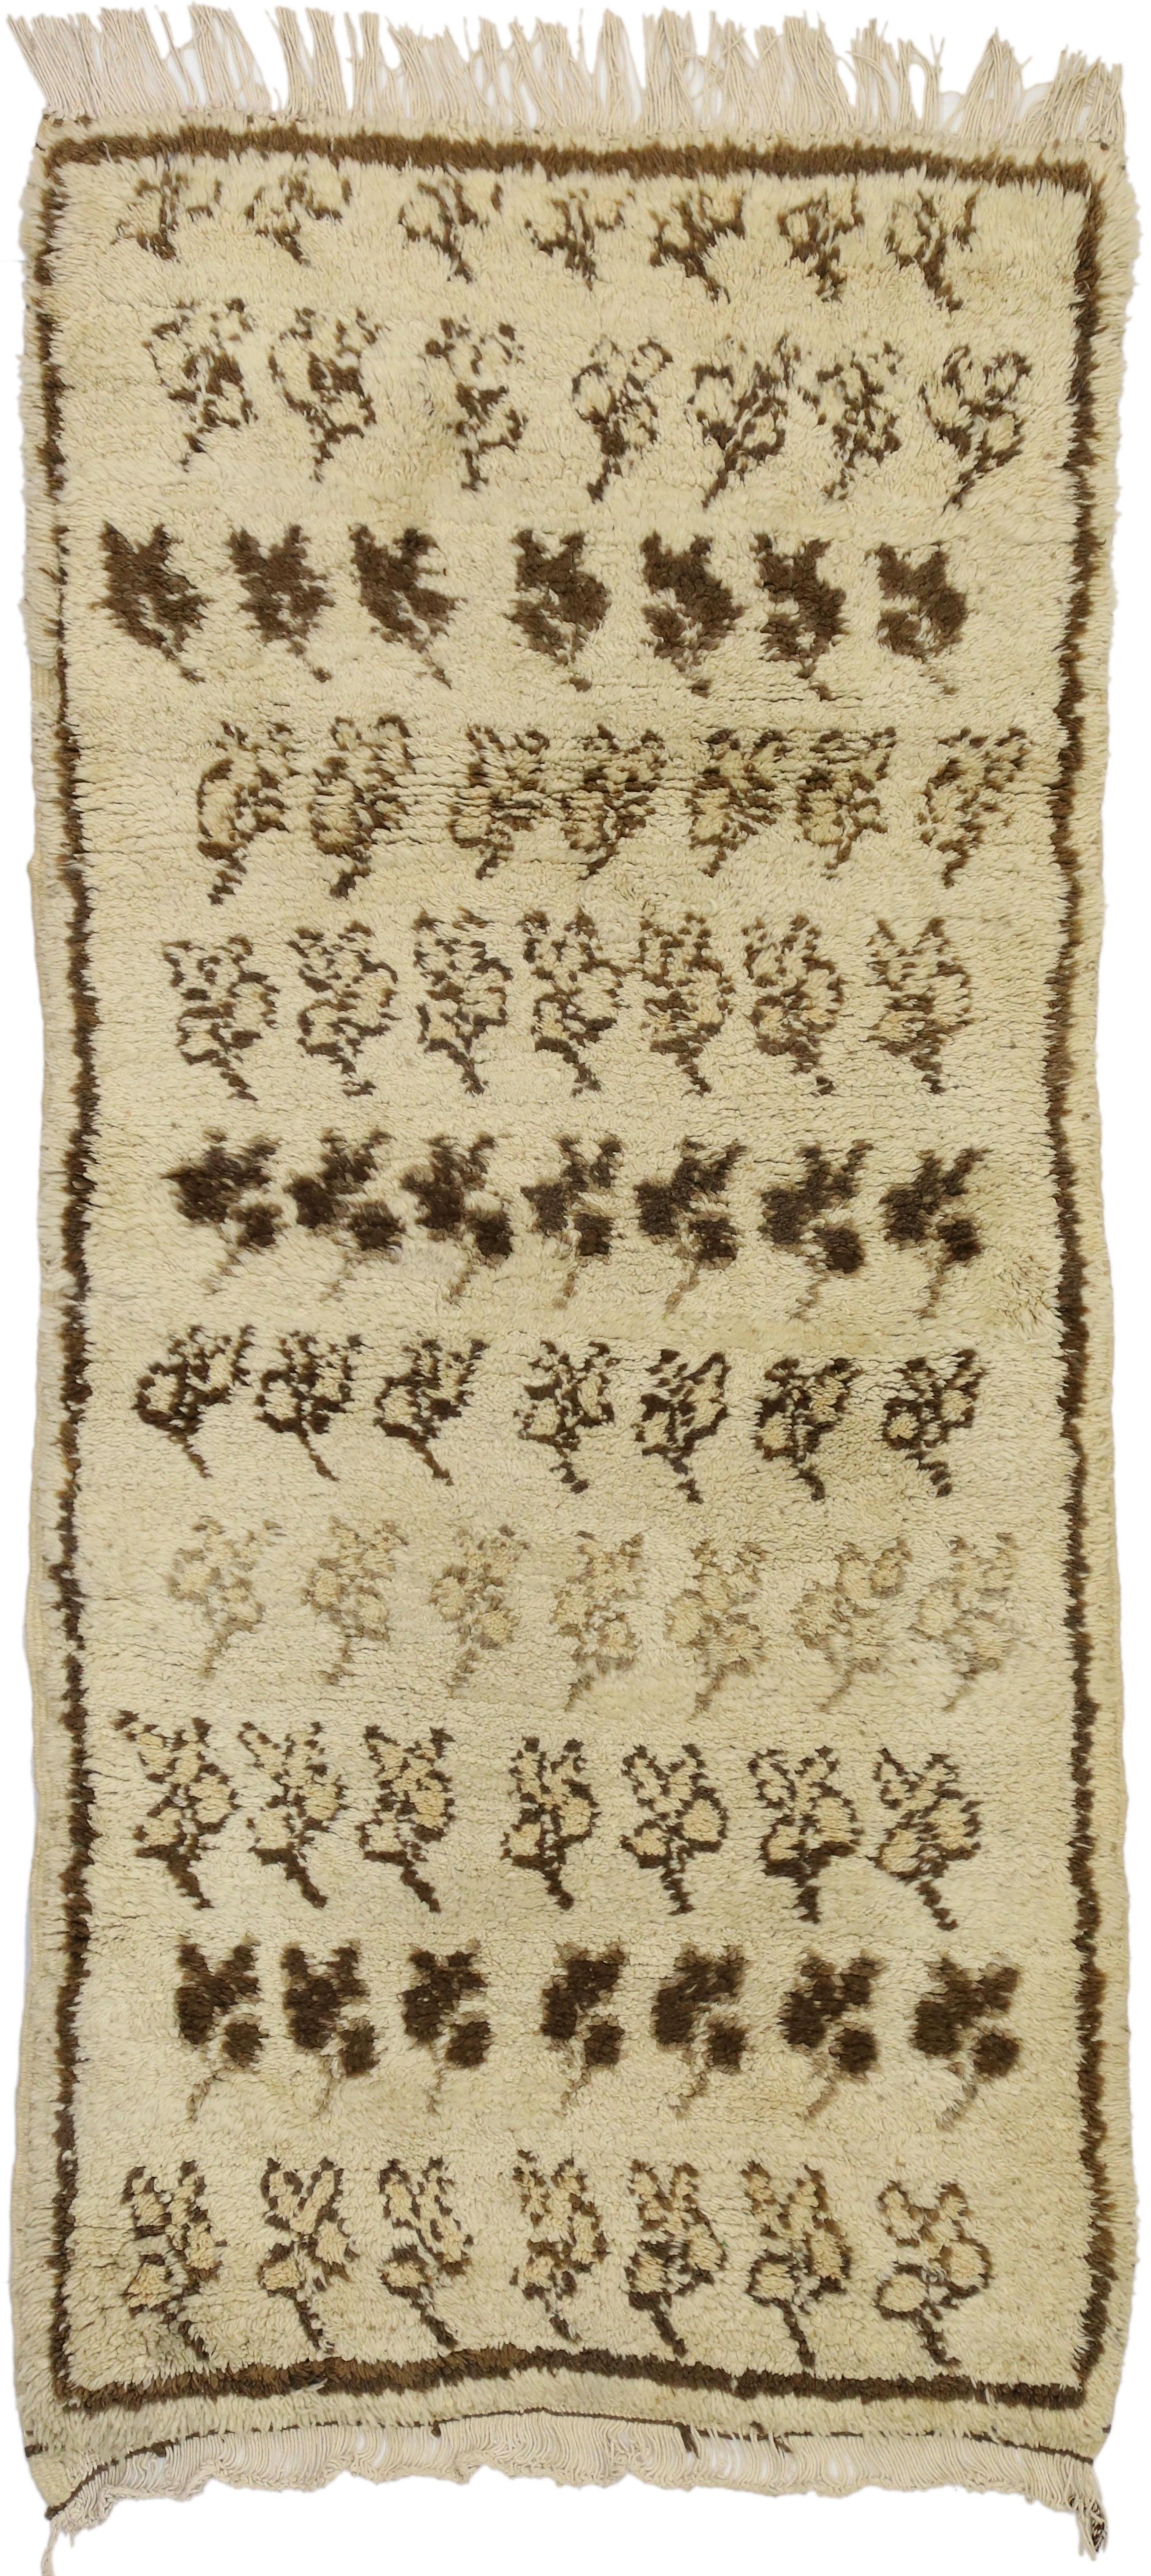 20863, Vintage Moroccan rug, Berber Moroccan rug with tribal style. This hand knotted wool vintage Moroccan rug features seven columns of flowers unfolding across an abrashed sandy-beige field. Though deceptively simple, this tribal design is